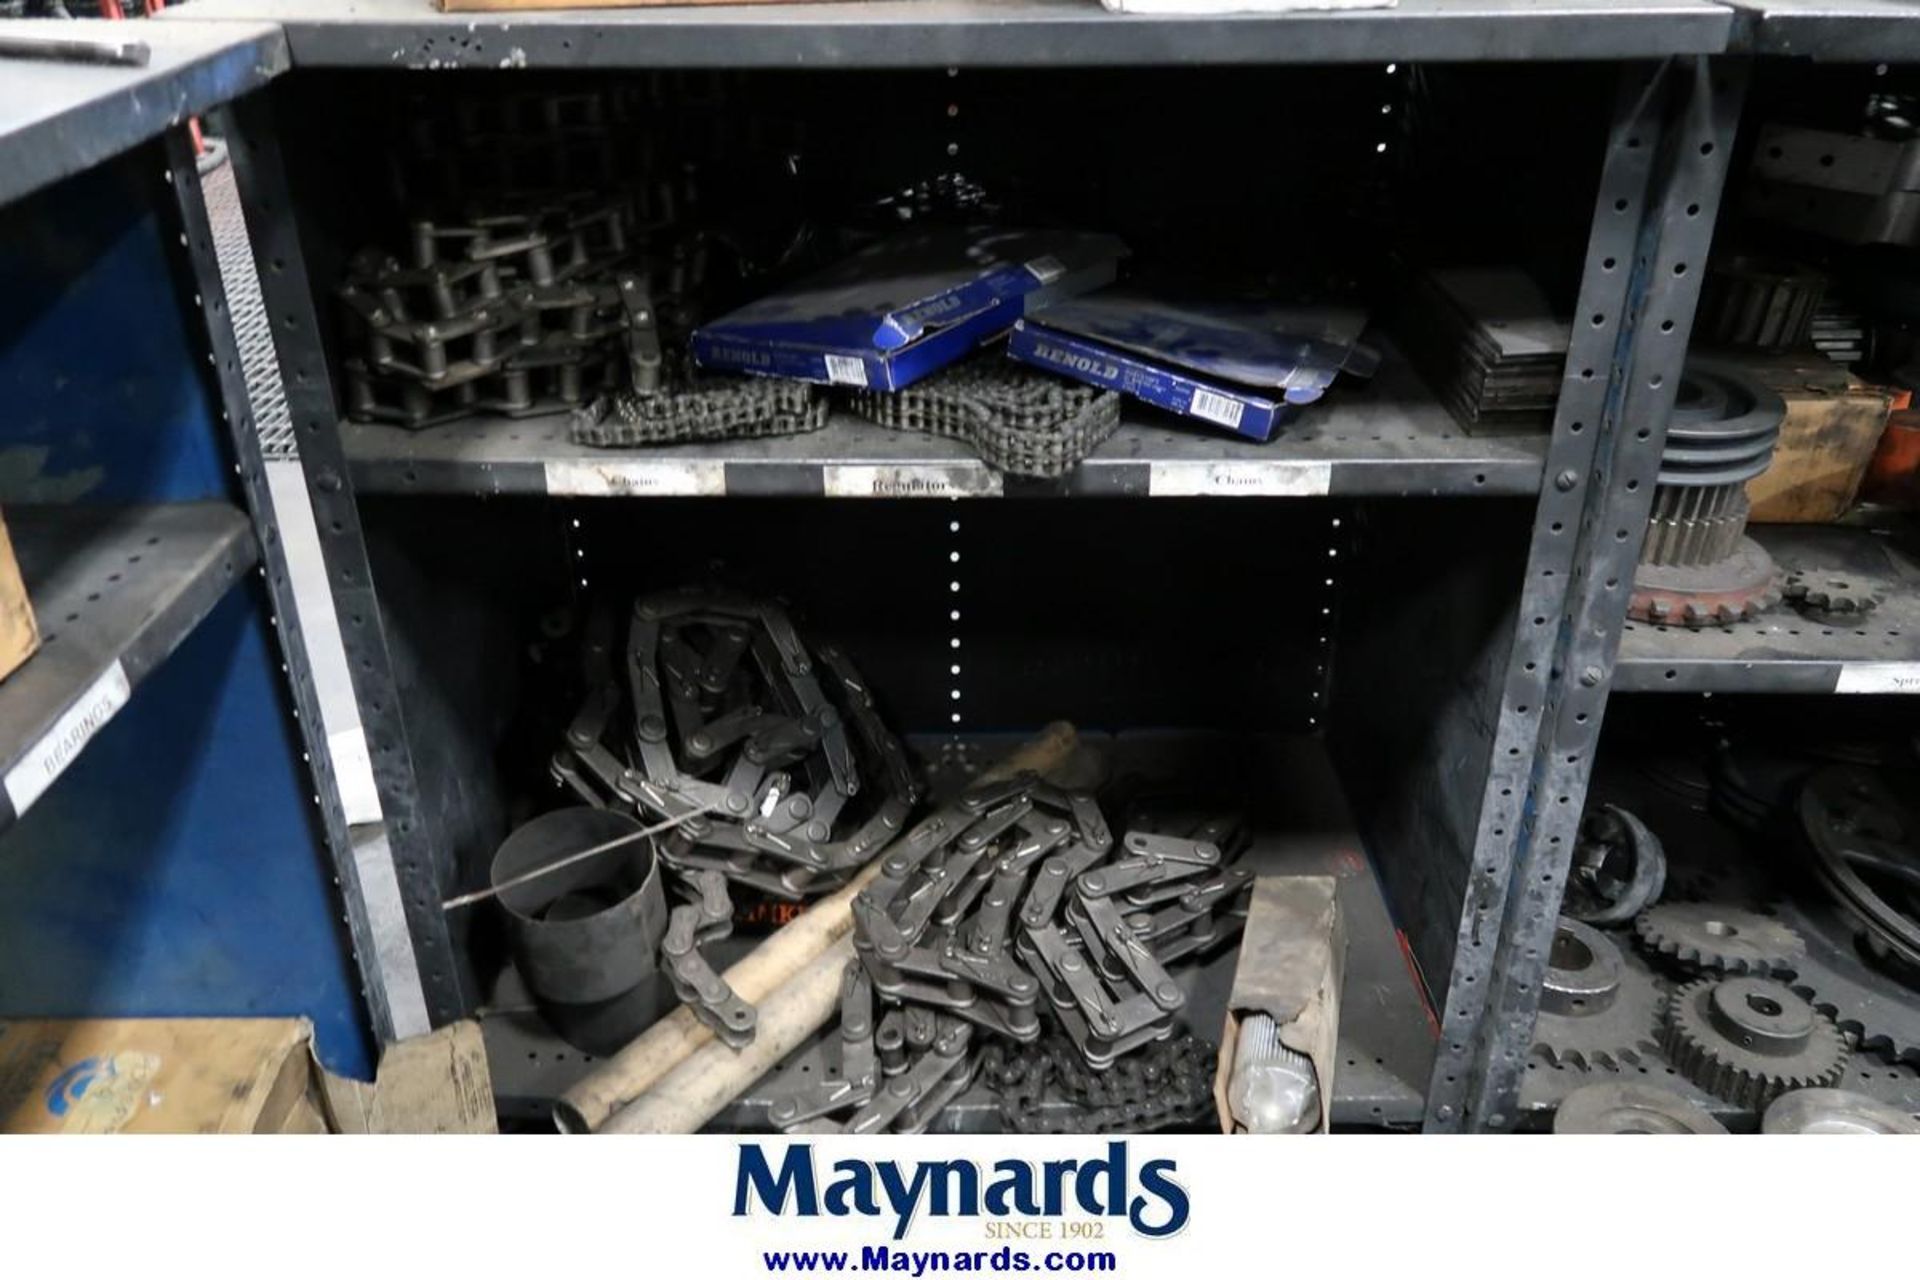 Adjustable Steel Shelving Units with Contents of Heat Treat Spare Parts - Image 14 of 16